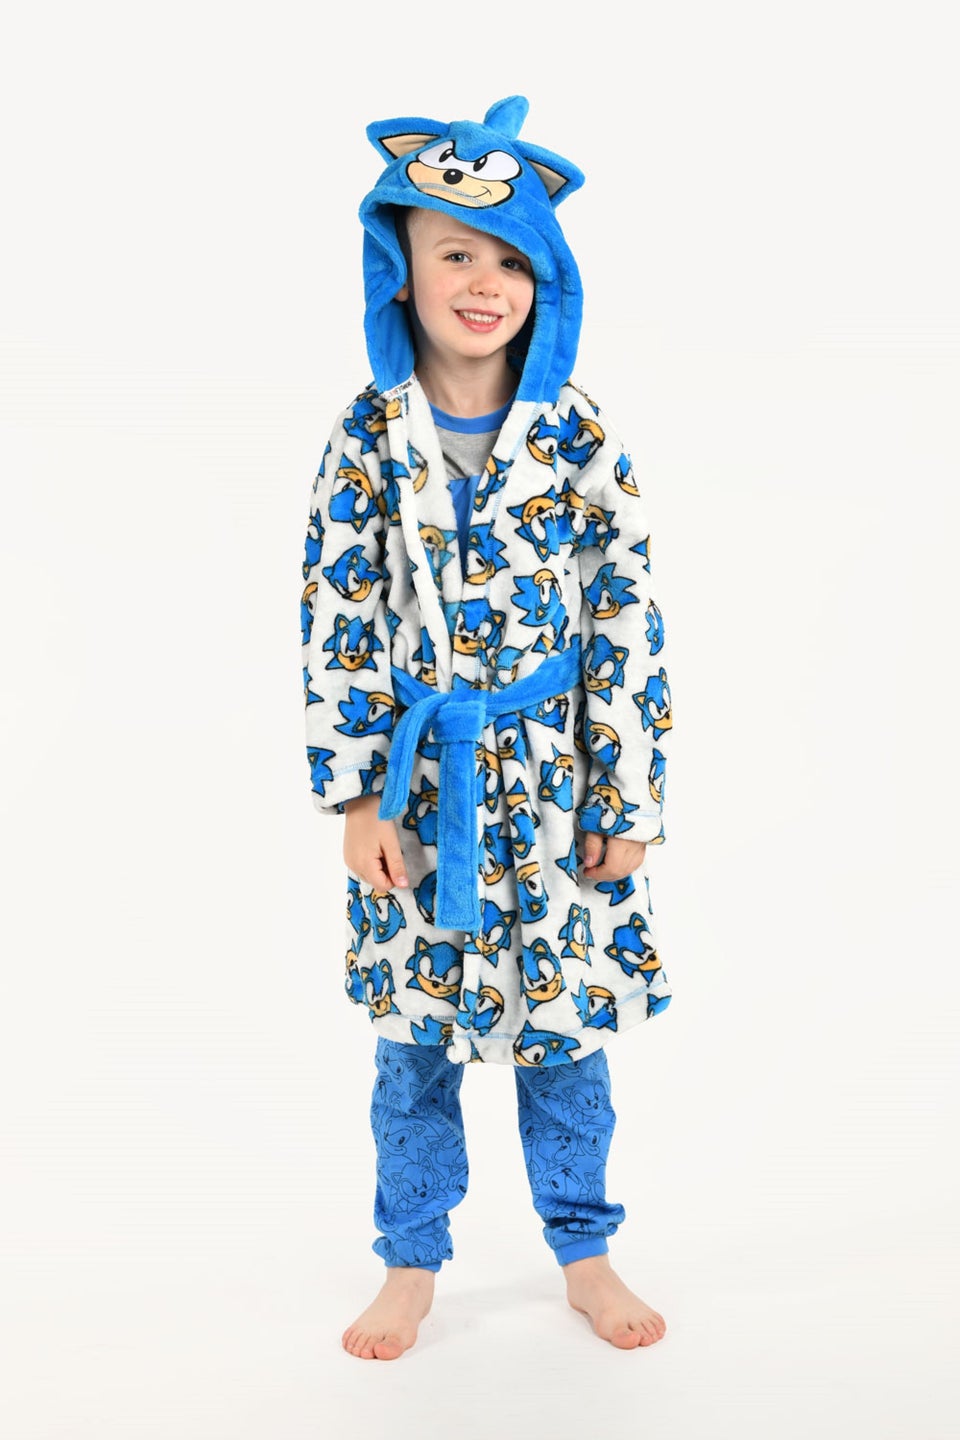 Brand Threads Kids' Sonic The Hedgehog Dressing Gown